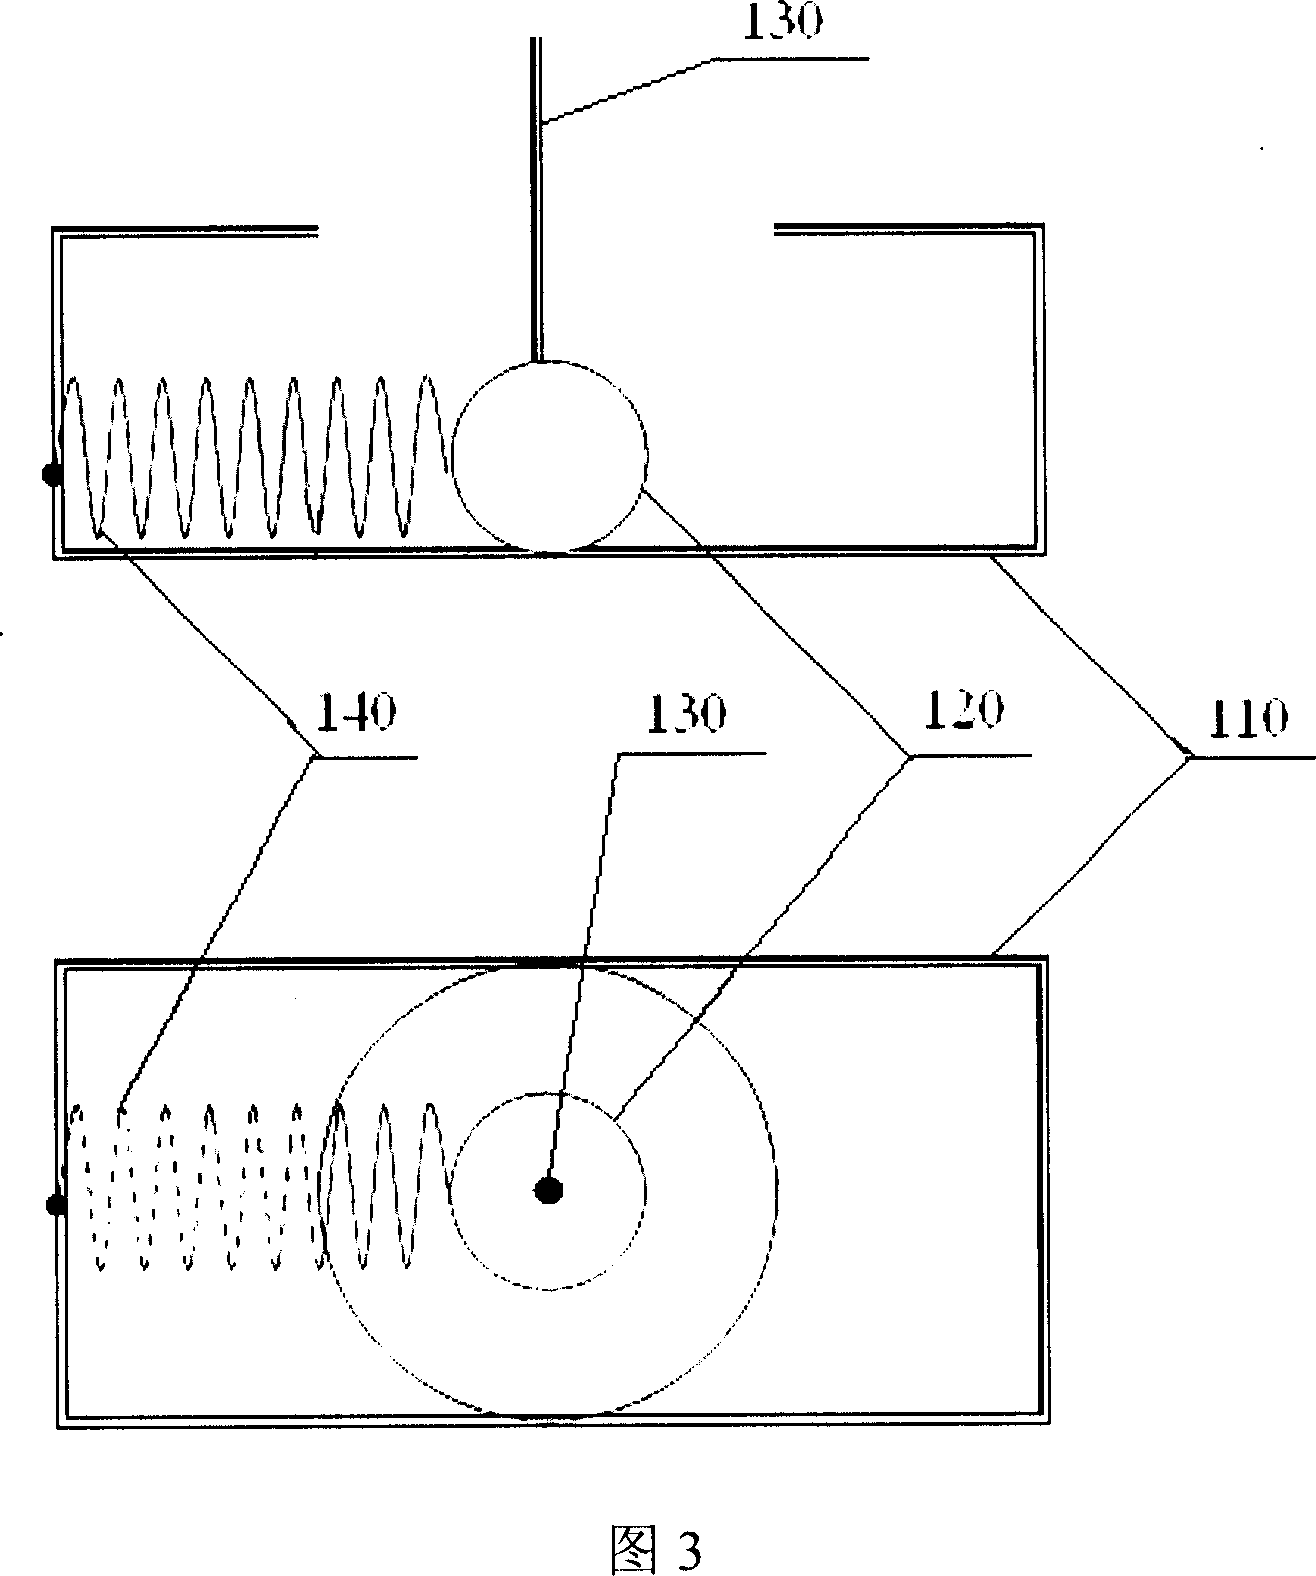 Induction system for breaking circuit by bump